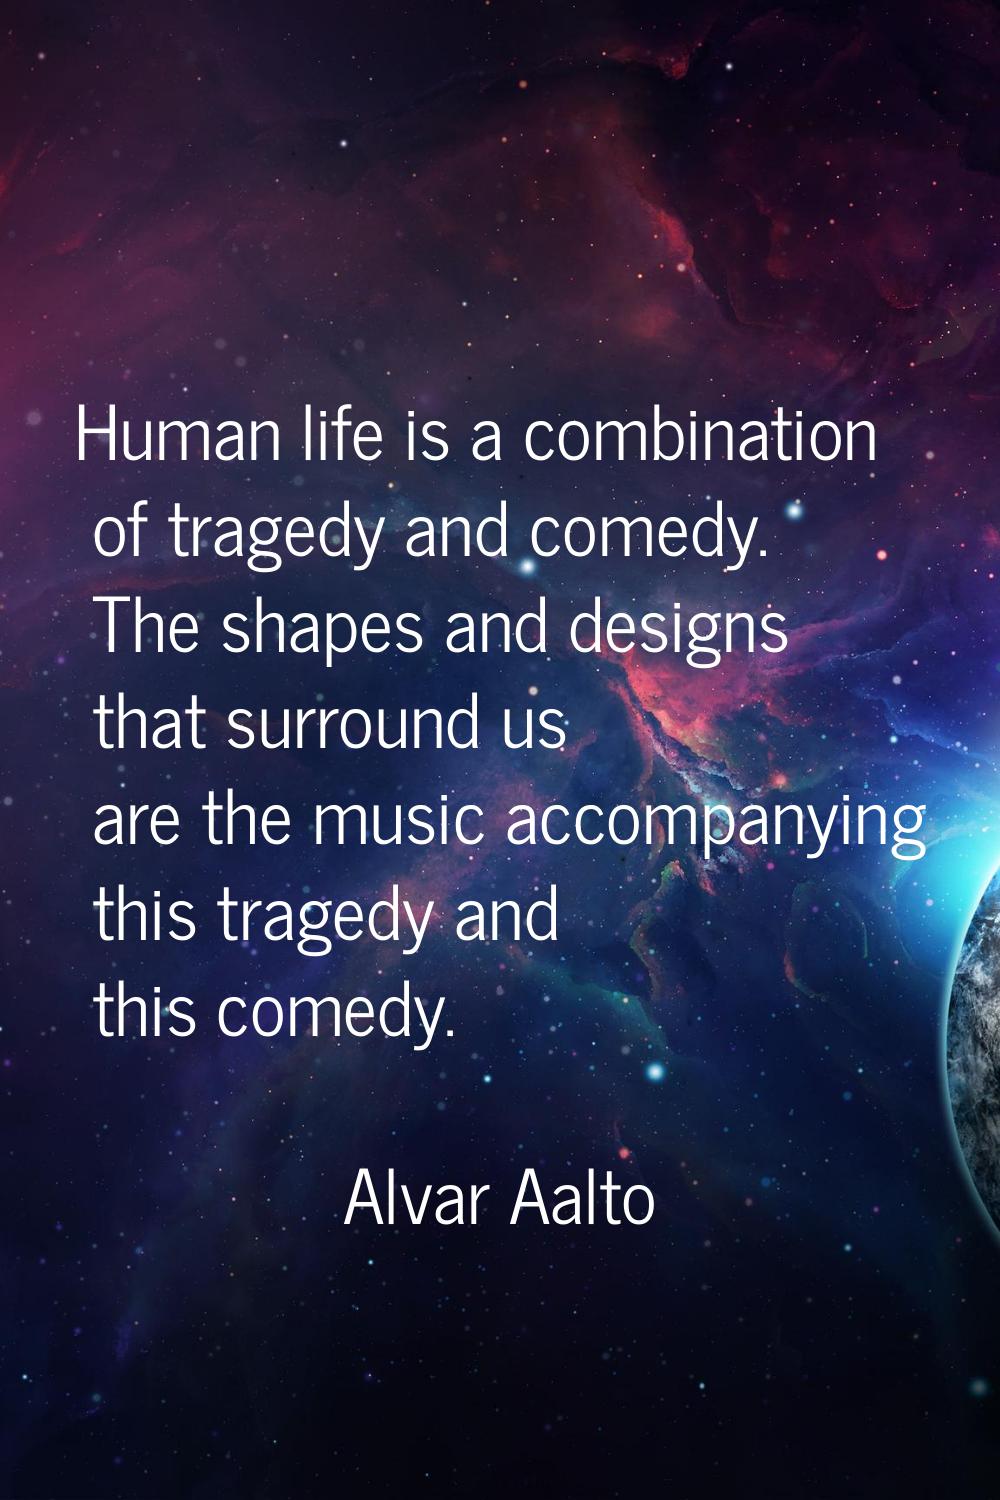 Human life is a combination of tragedy and comedy. The shapes and designs that surround us are the 